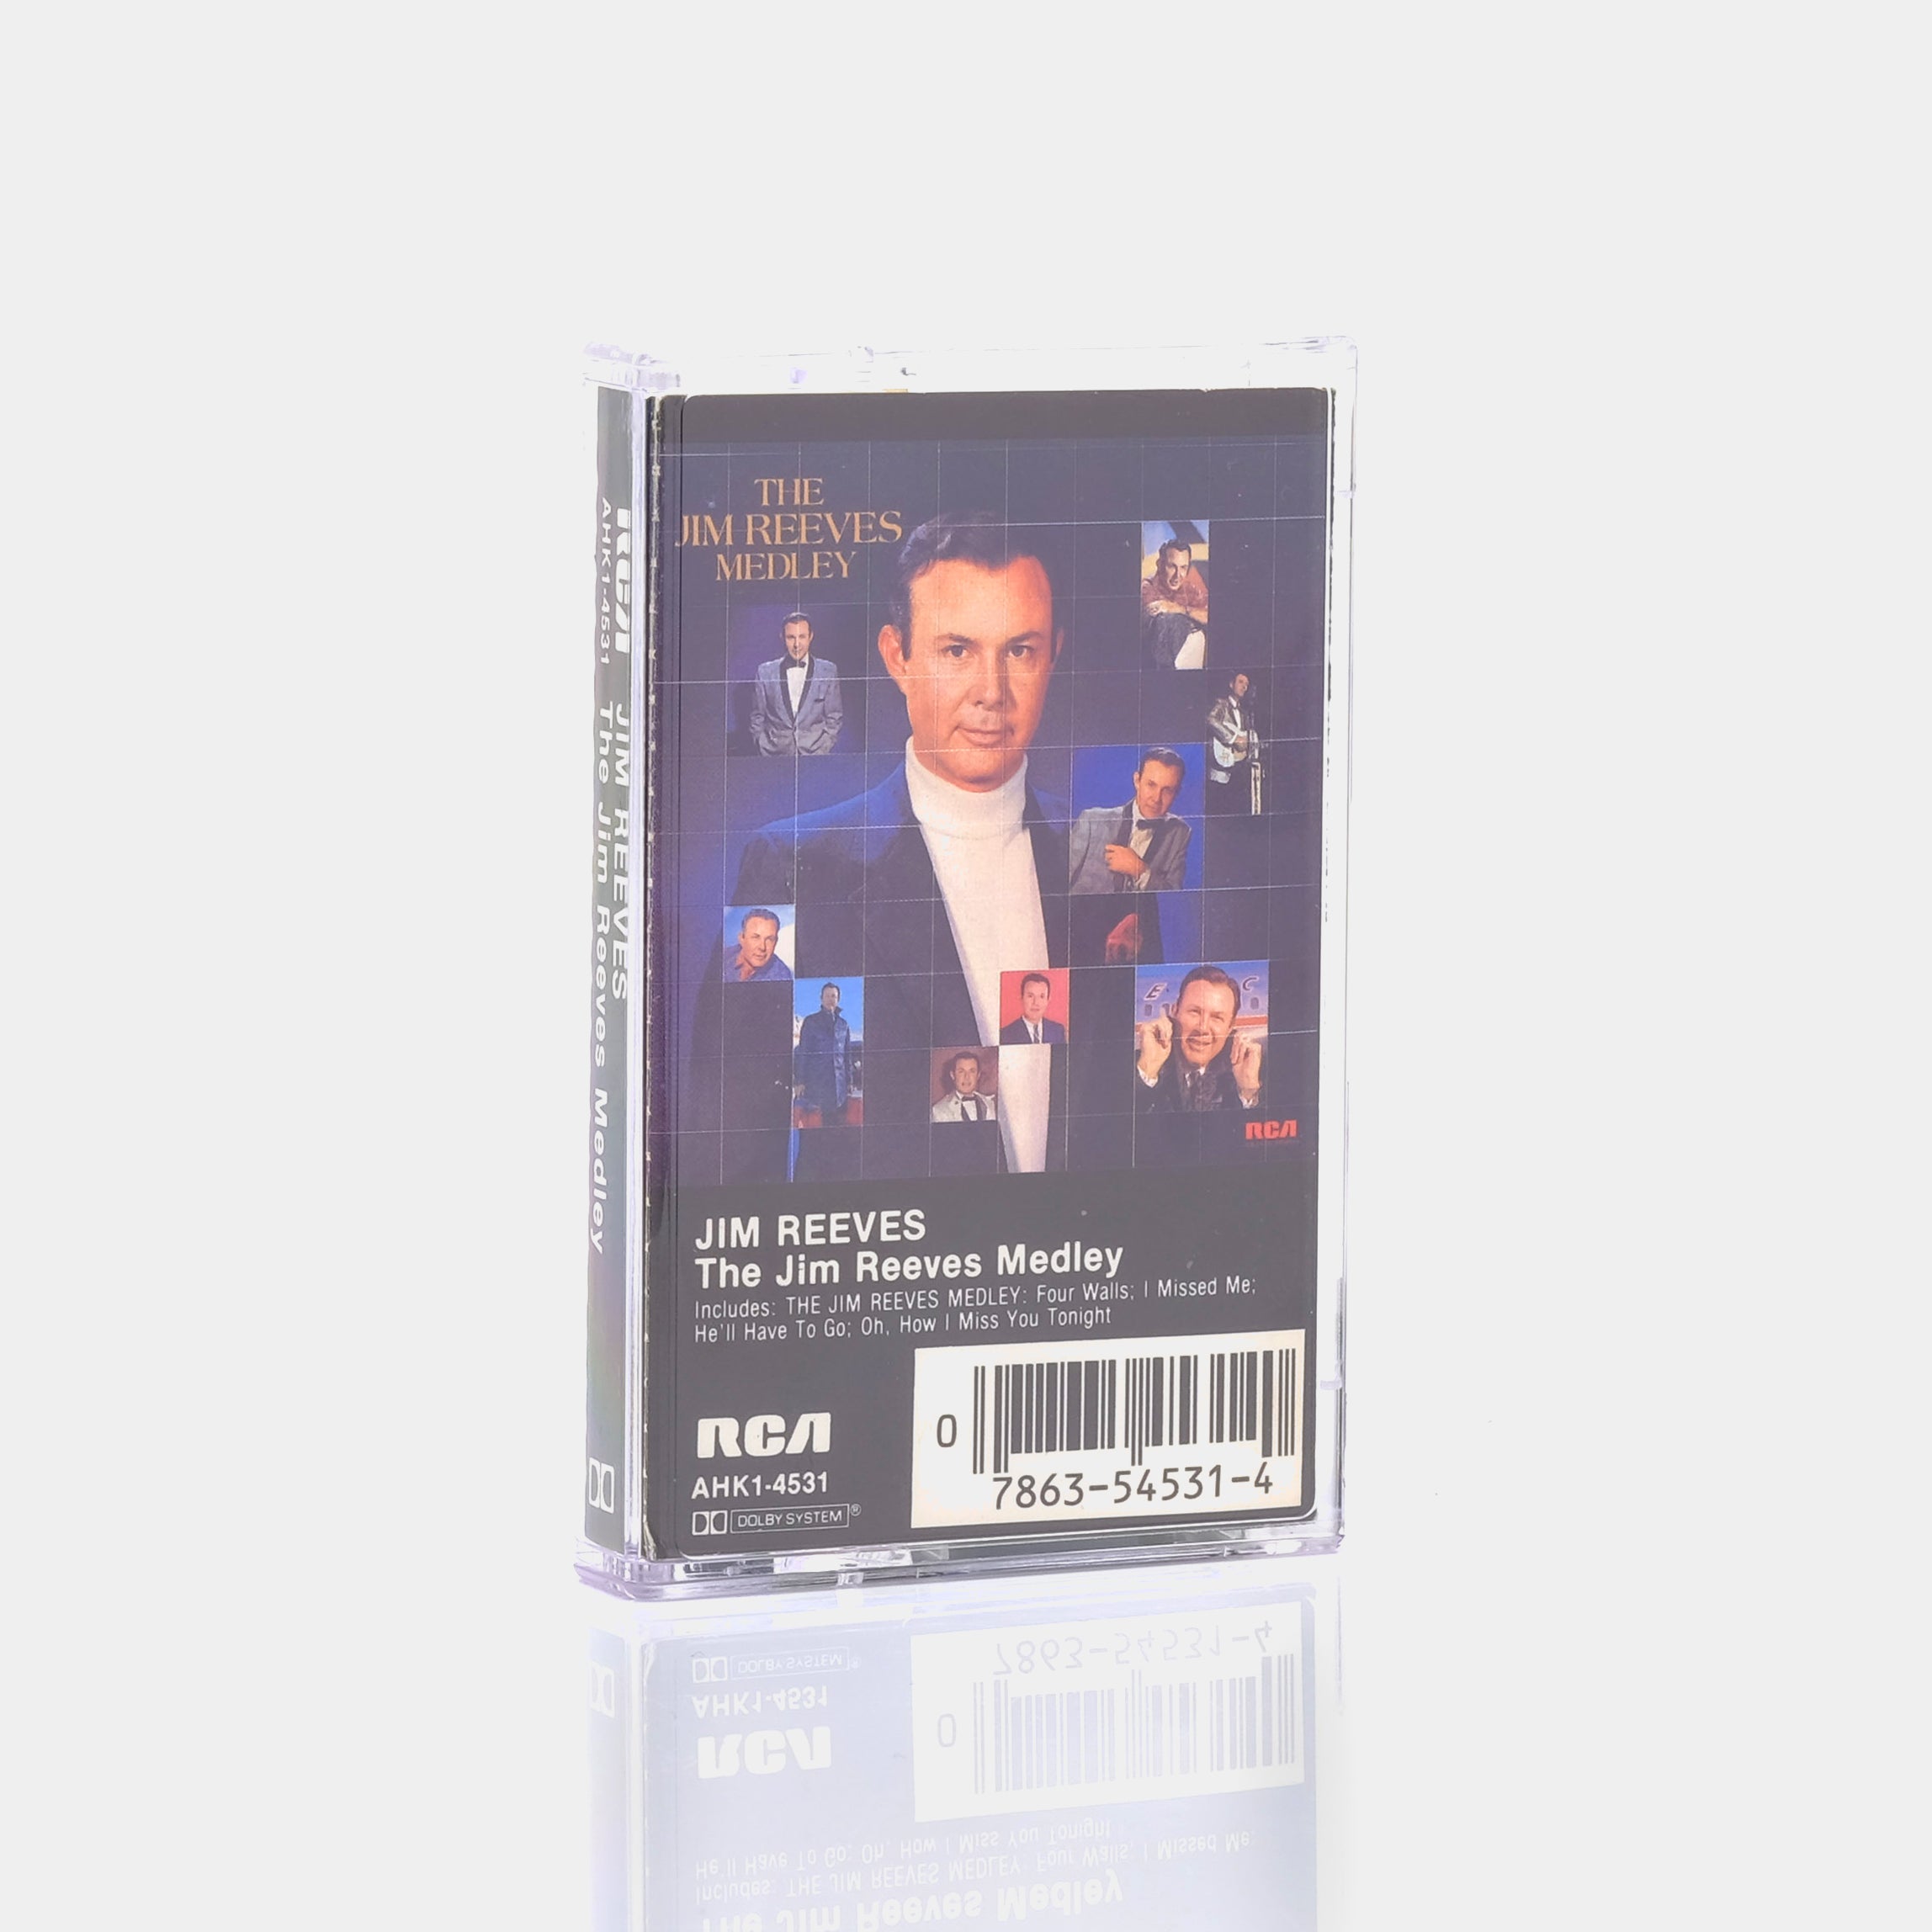 Jim Reeves - The Jim Reeves Medley Cassette Tape